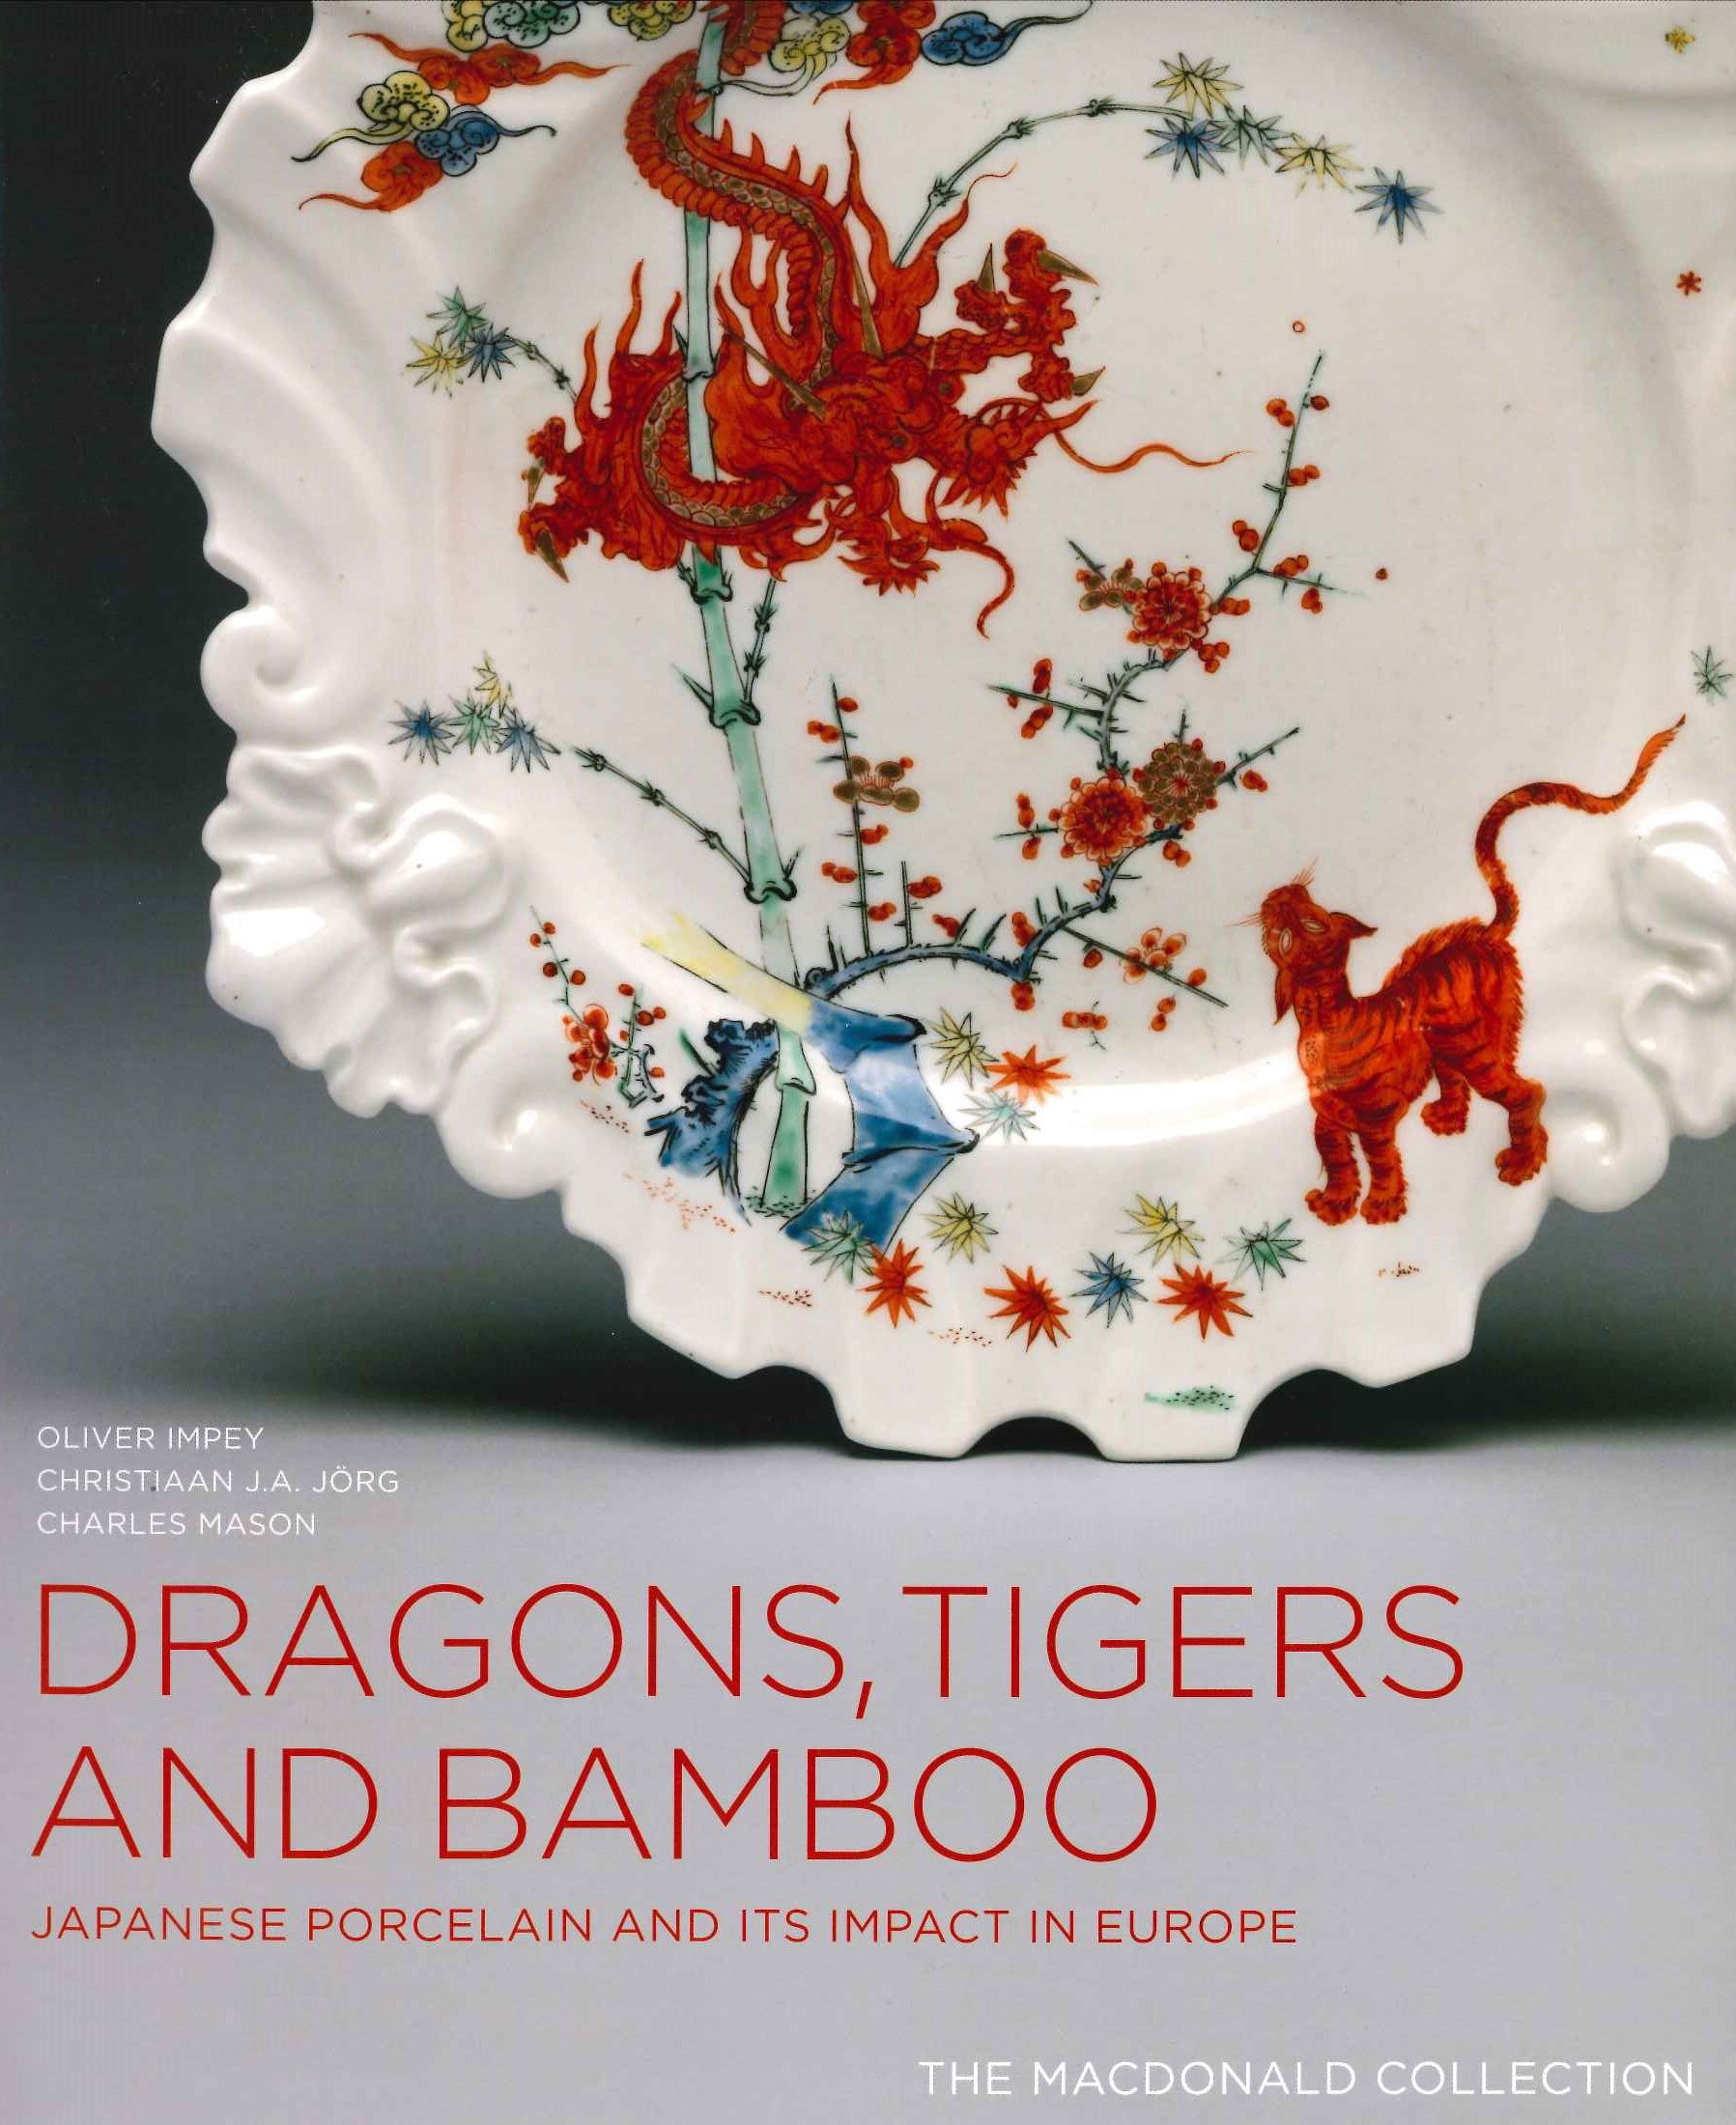 Collections Catalogue: Dragons, Tigers and Bamboo Product Image 1 of 1